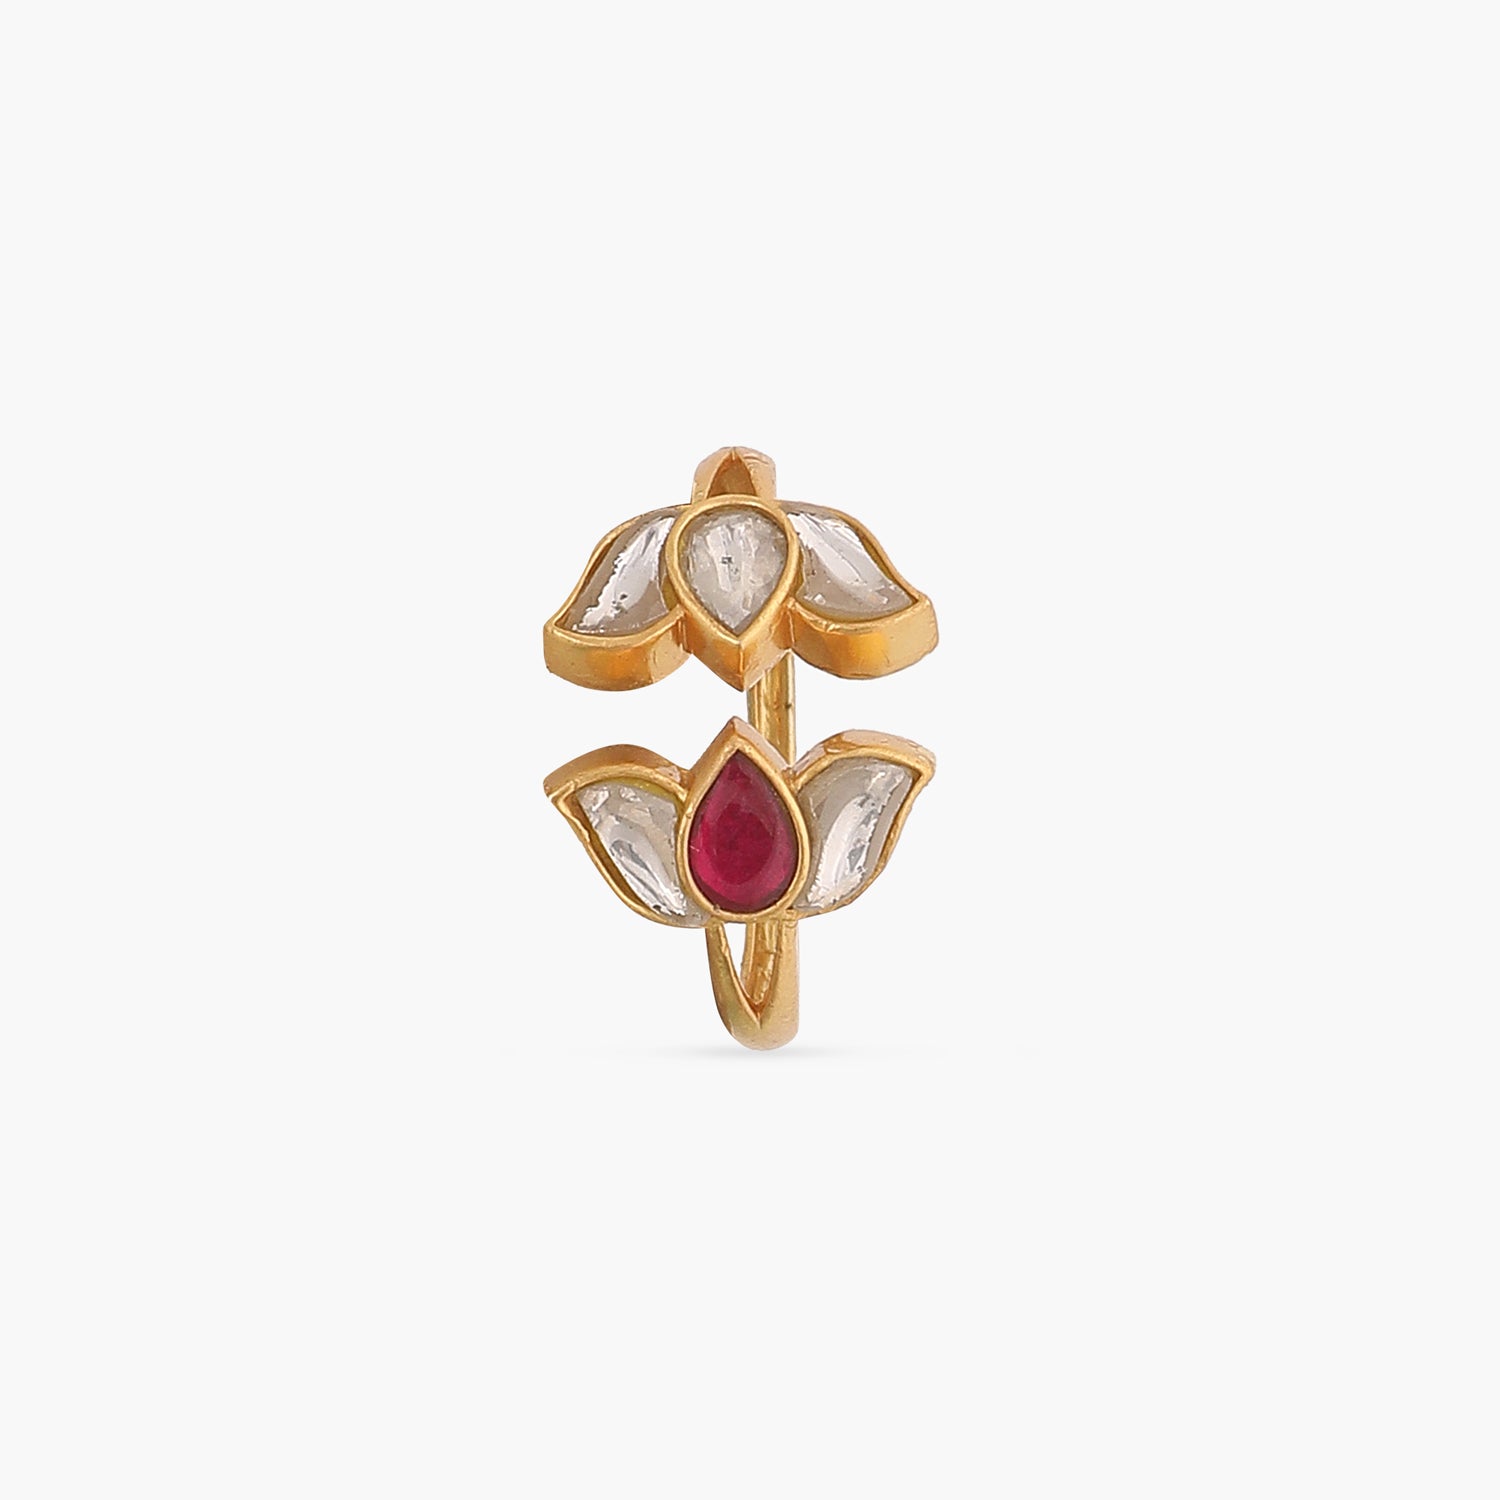 Buy Navratan Gold Polished Silver Ring/designer Multicolor Stones Ring/gold  Look Alike Ring Online in India - Etsy